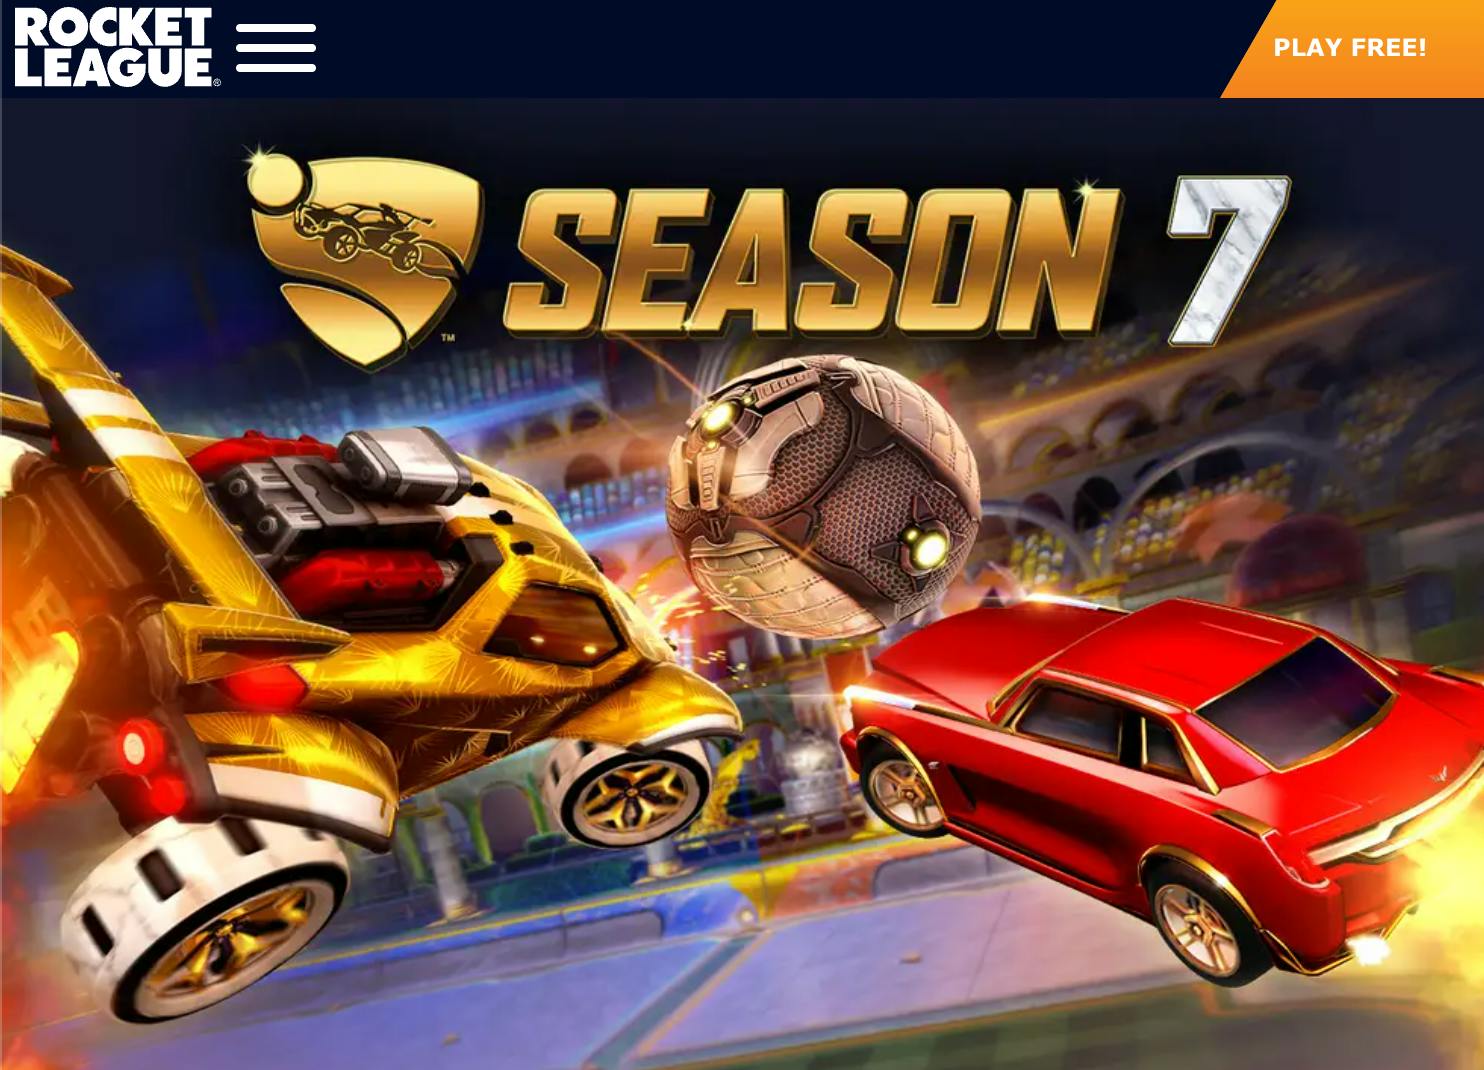 A screenshot of the banner on the Rocket League website's main page.